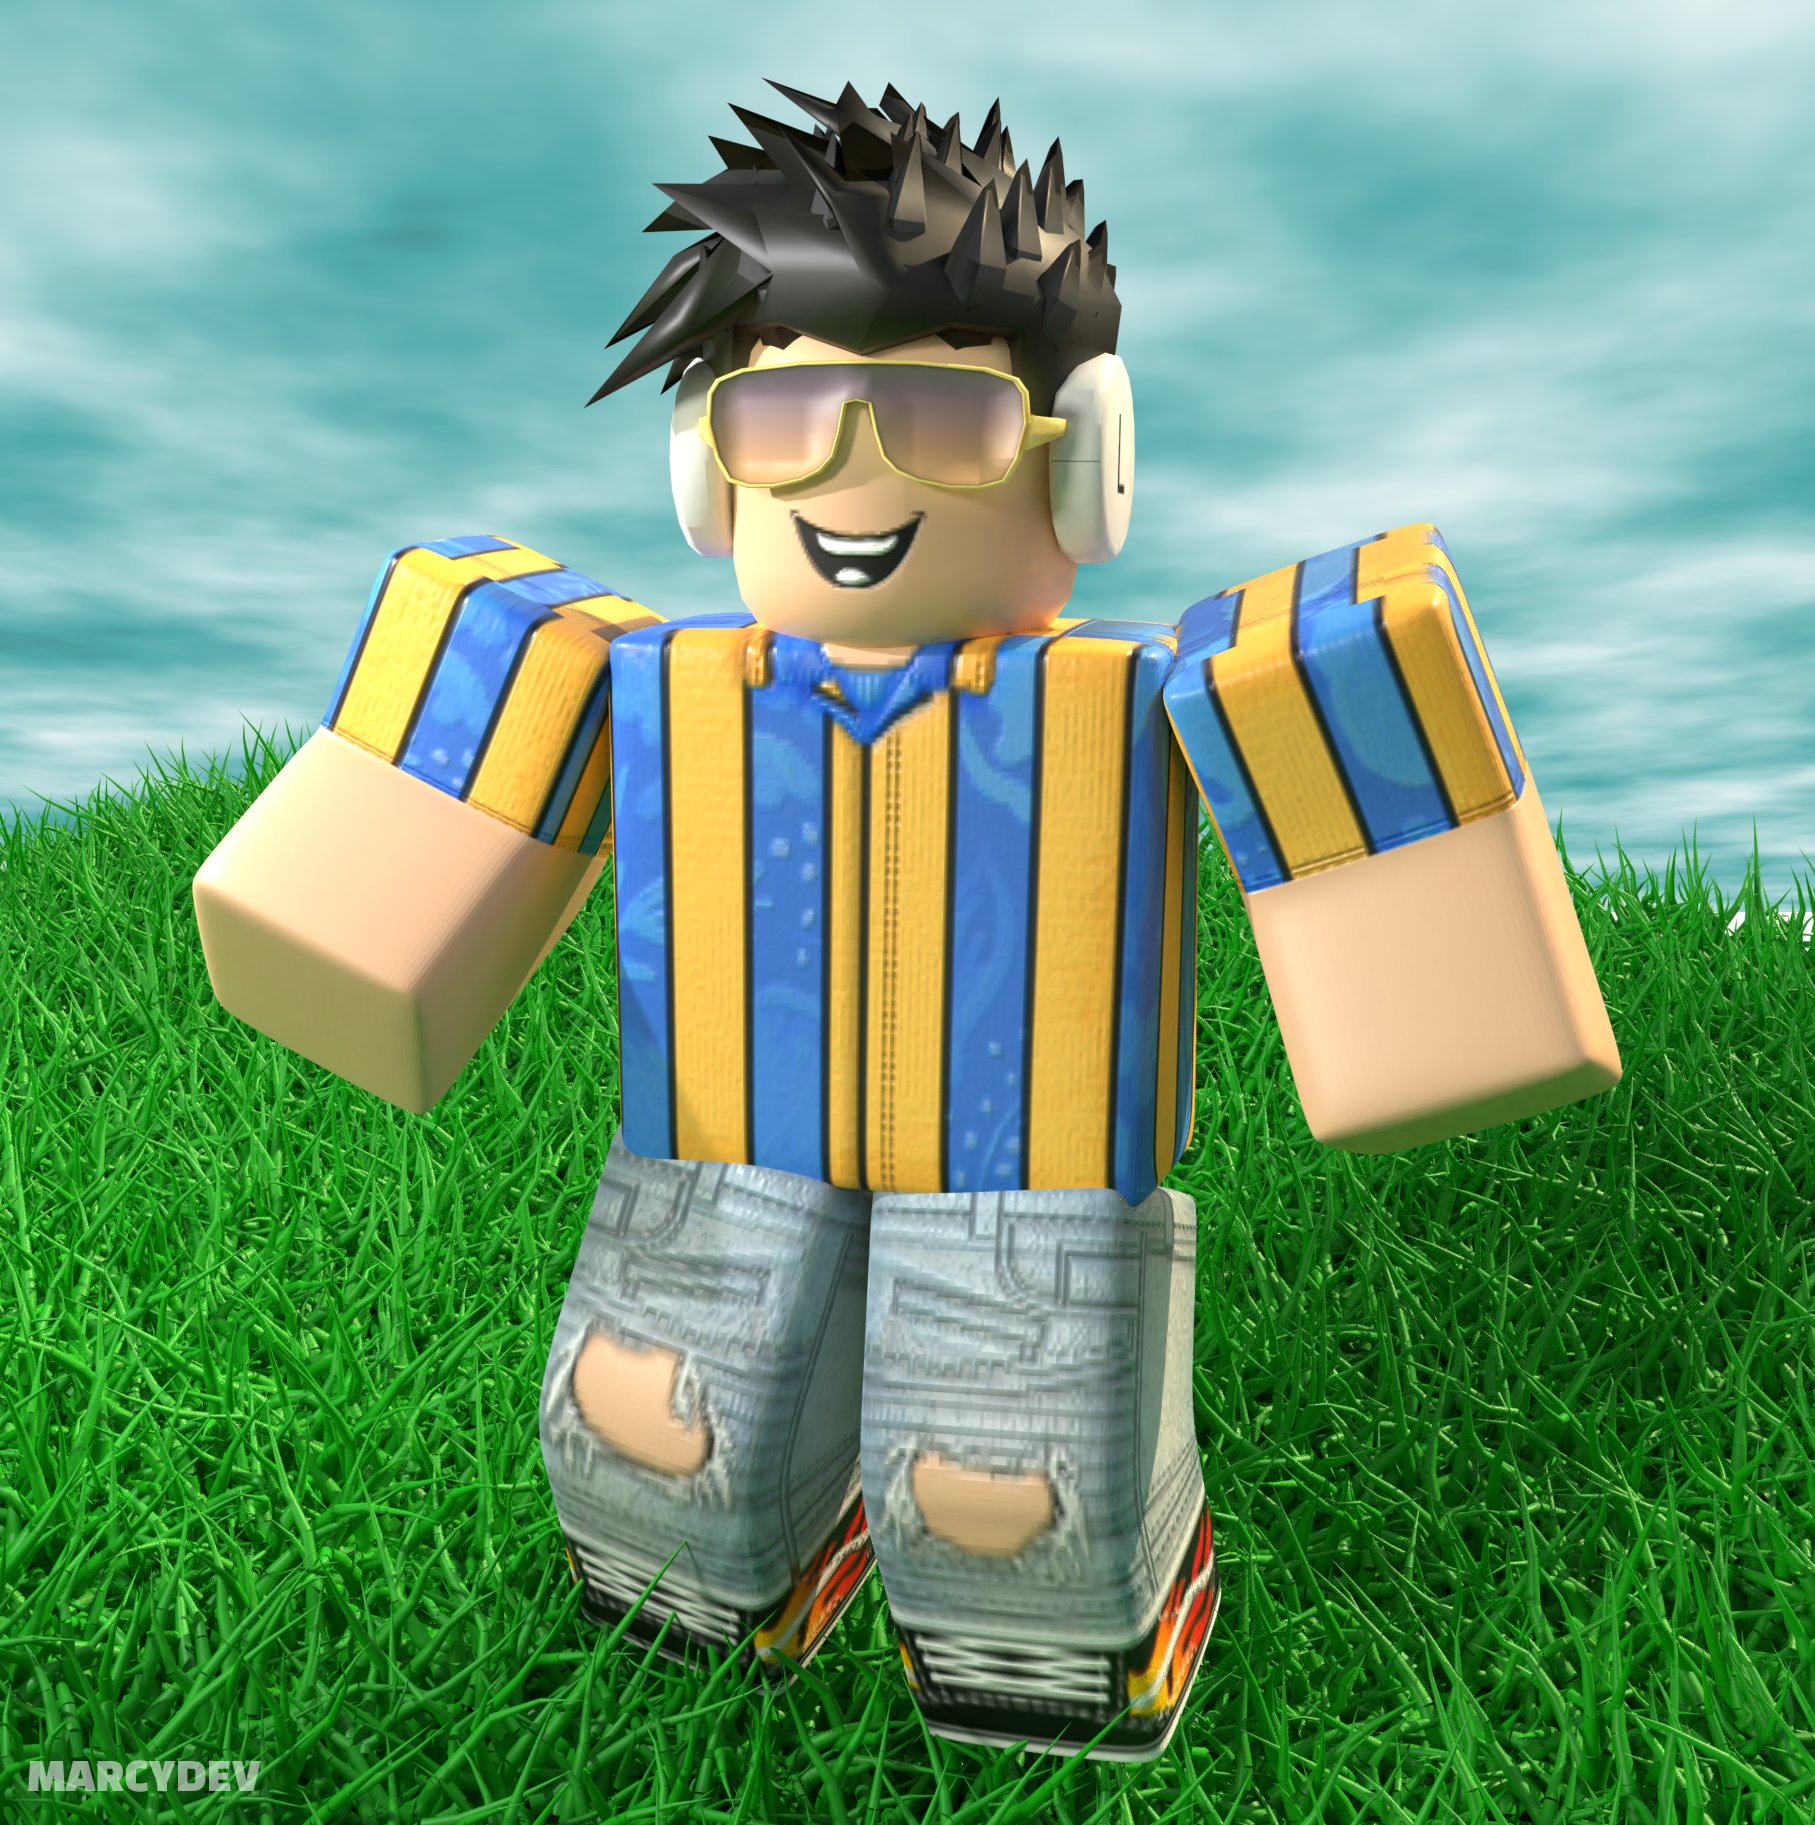 Marcydev On Twitter Made This Gfx For Rightiess Robloxdev Robloxgfx Roblox - mboy789 on twitter made for more realistic roblox games